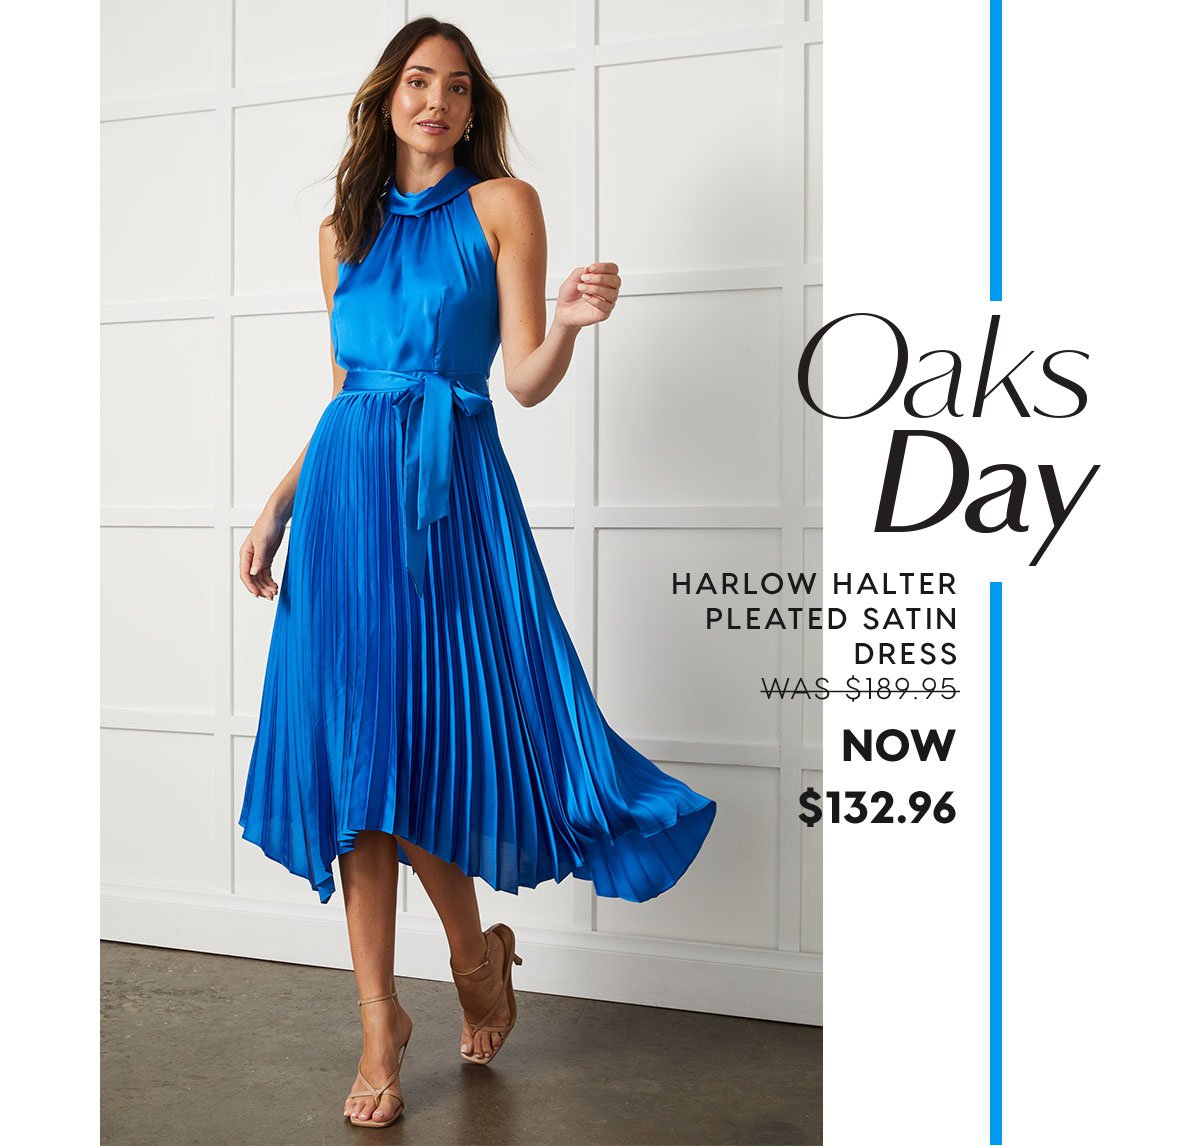 Oakes Day. Harlow Halter Pleated Satin Dress  WAS $189.95 NOW $132.96